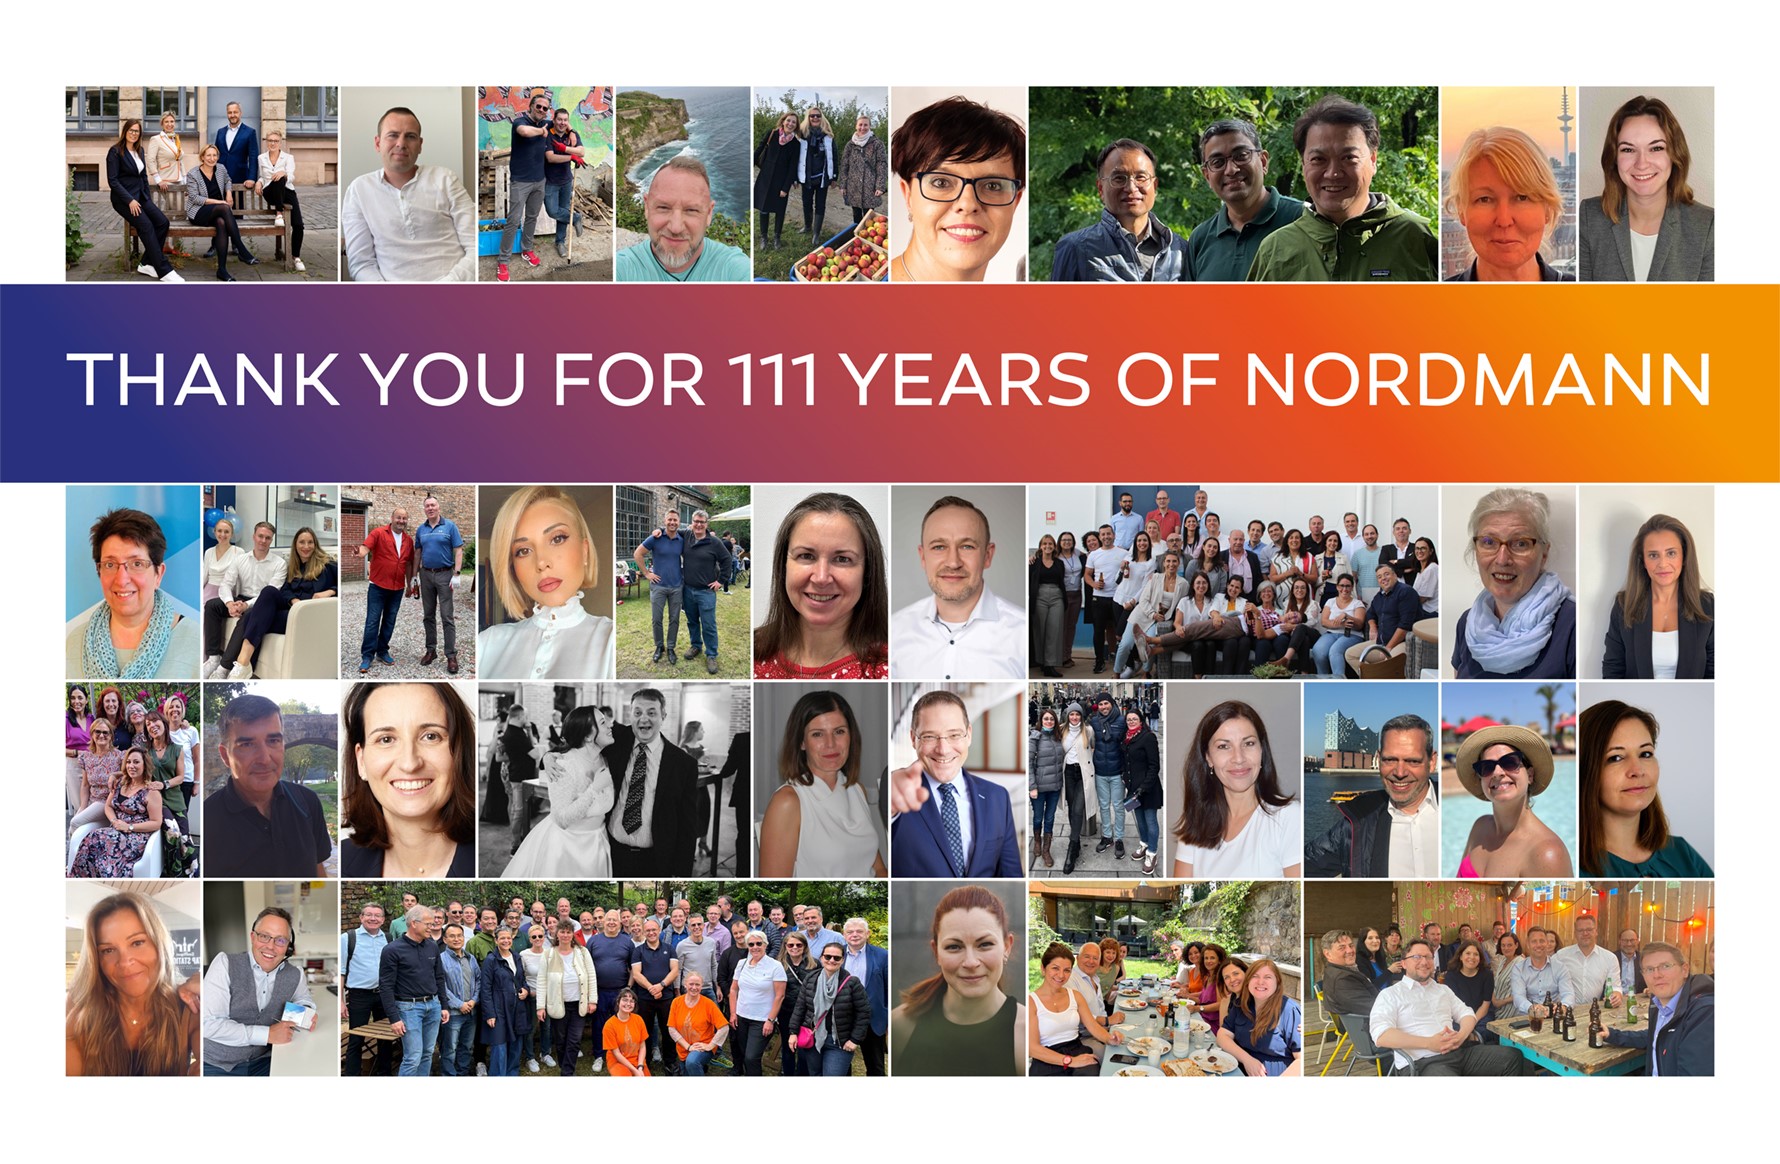 Thank you for 111 years of Nordmann!